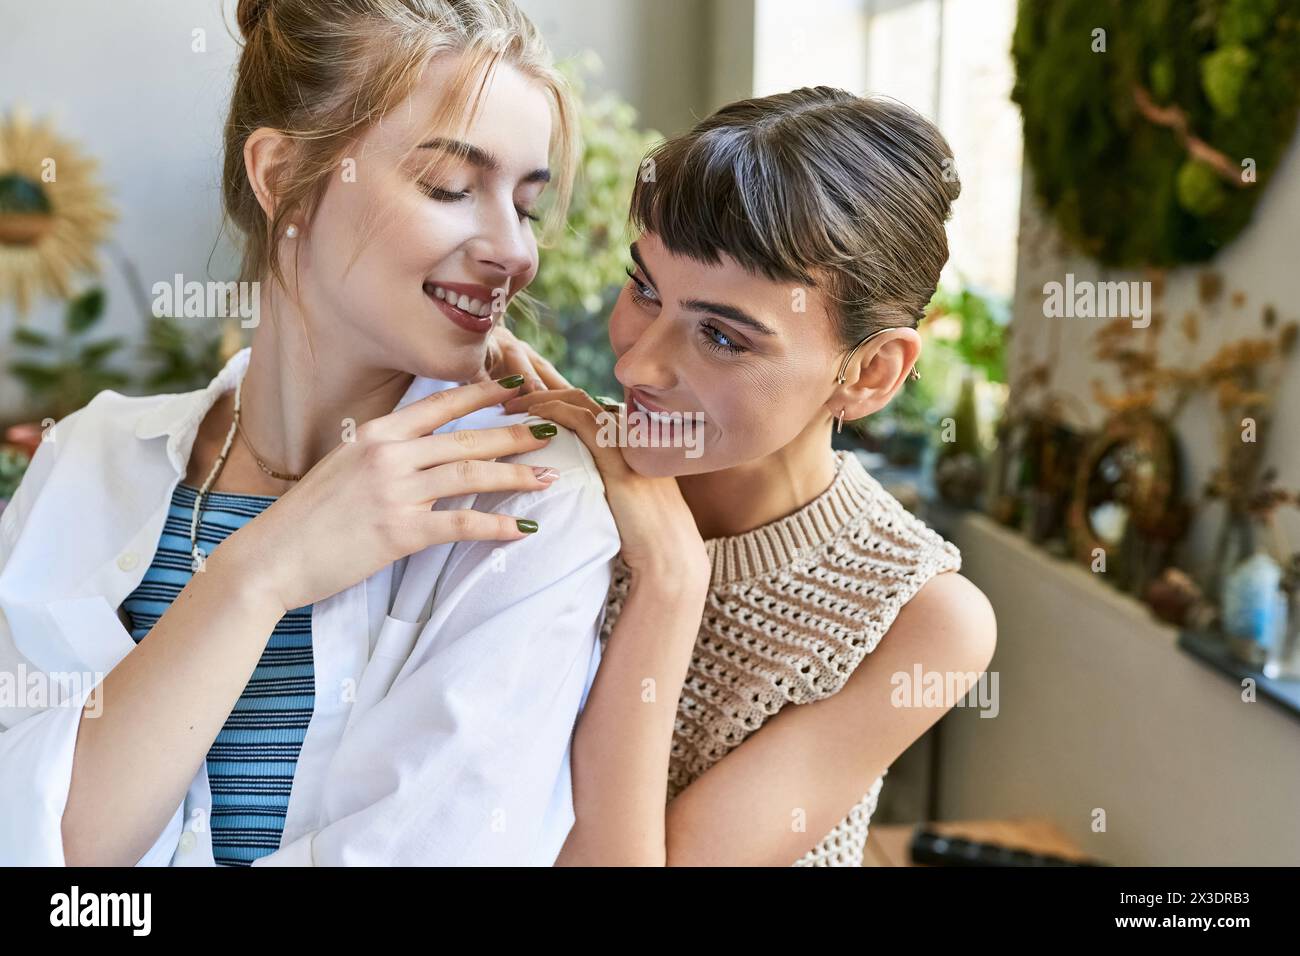 A woman lovingly hugs her girlfriend in an intimate moment. Stock Photo